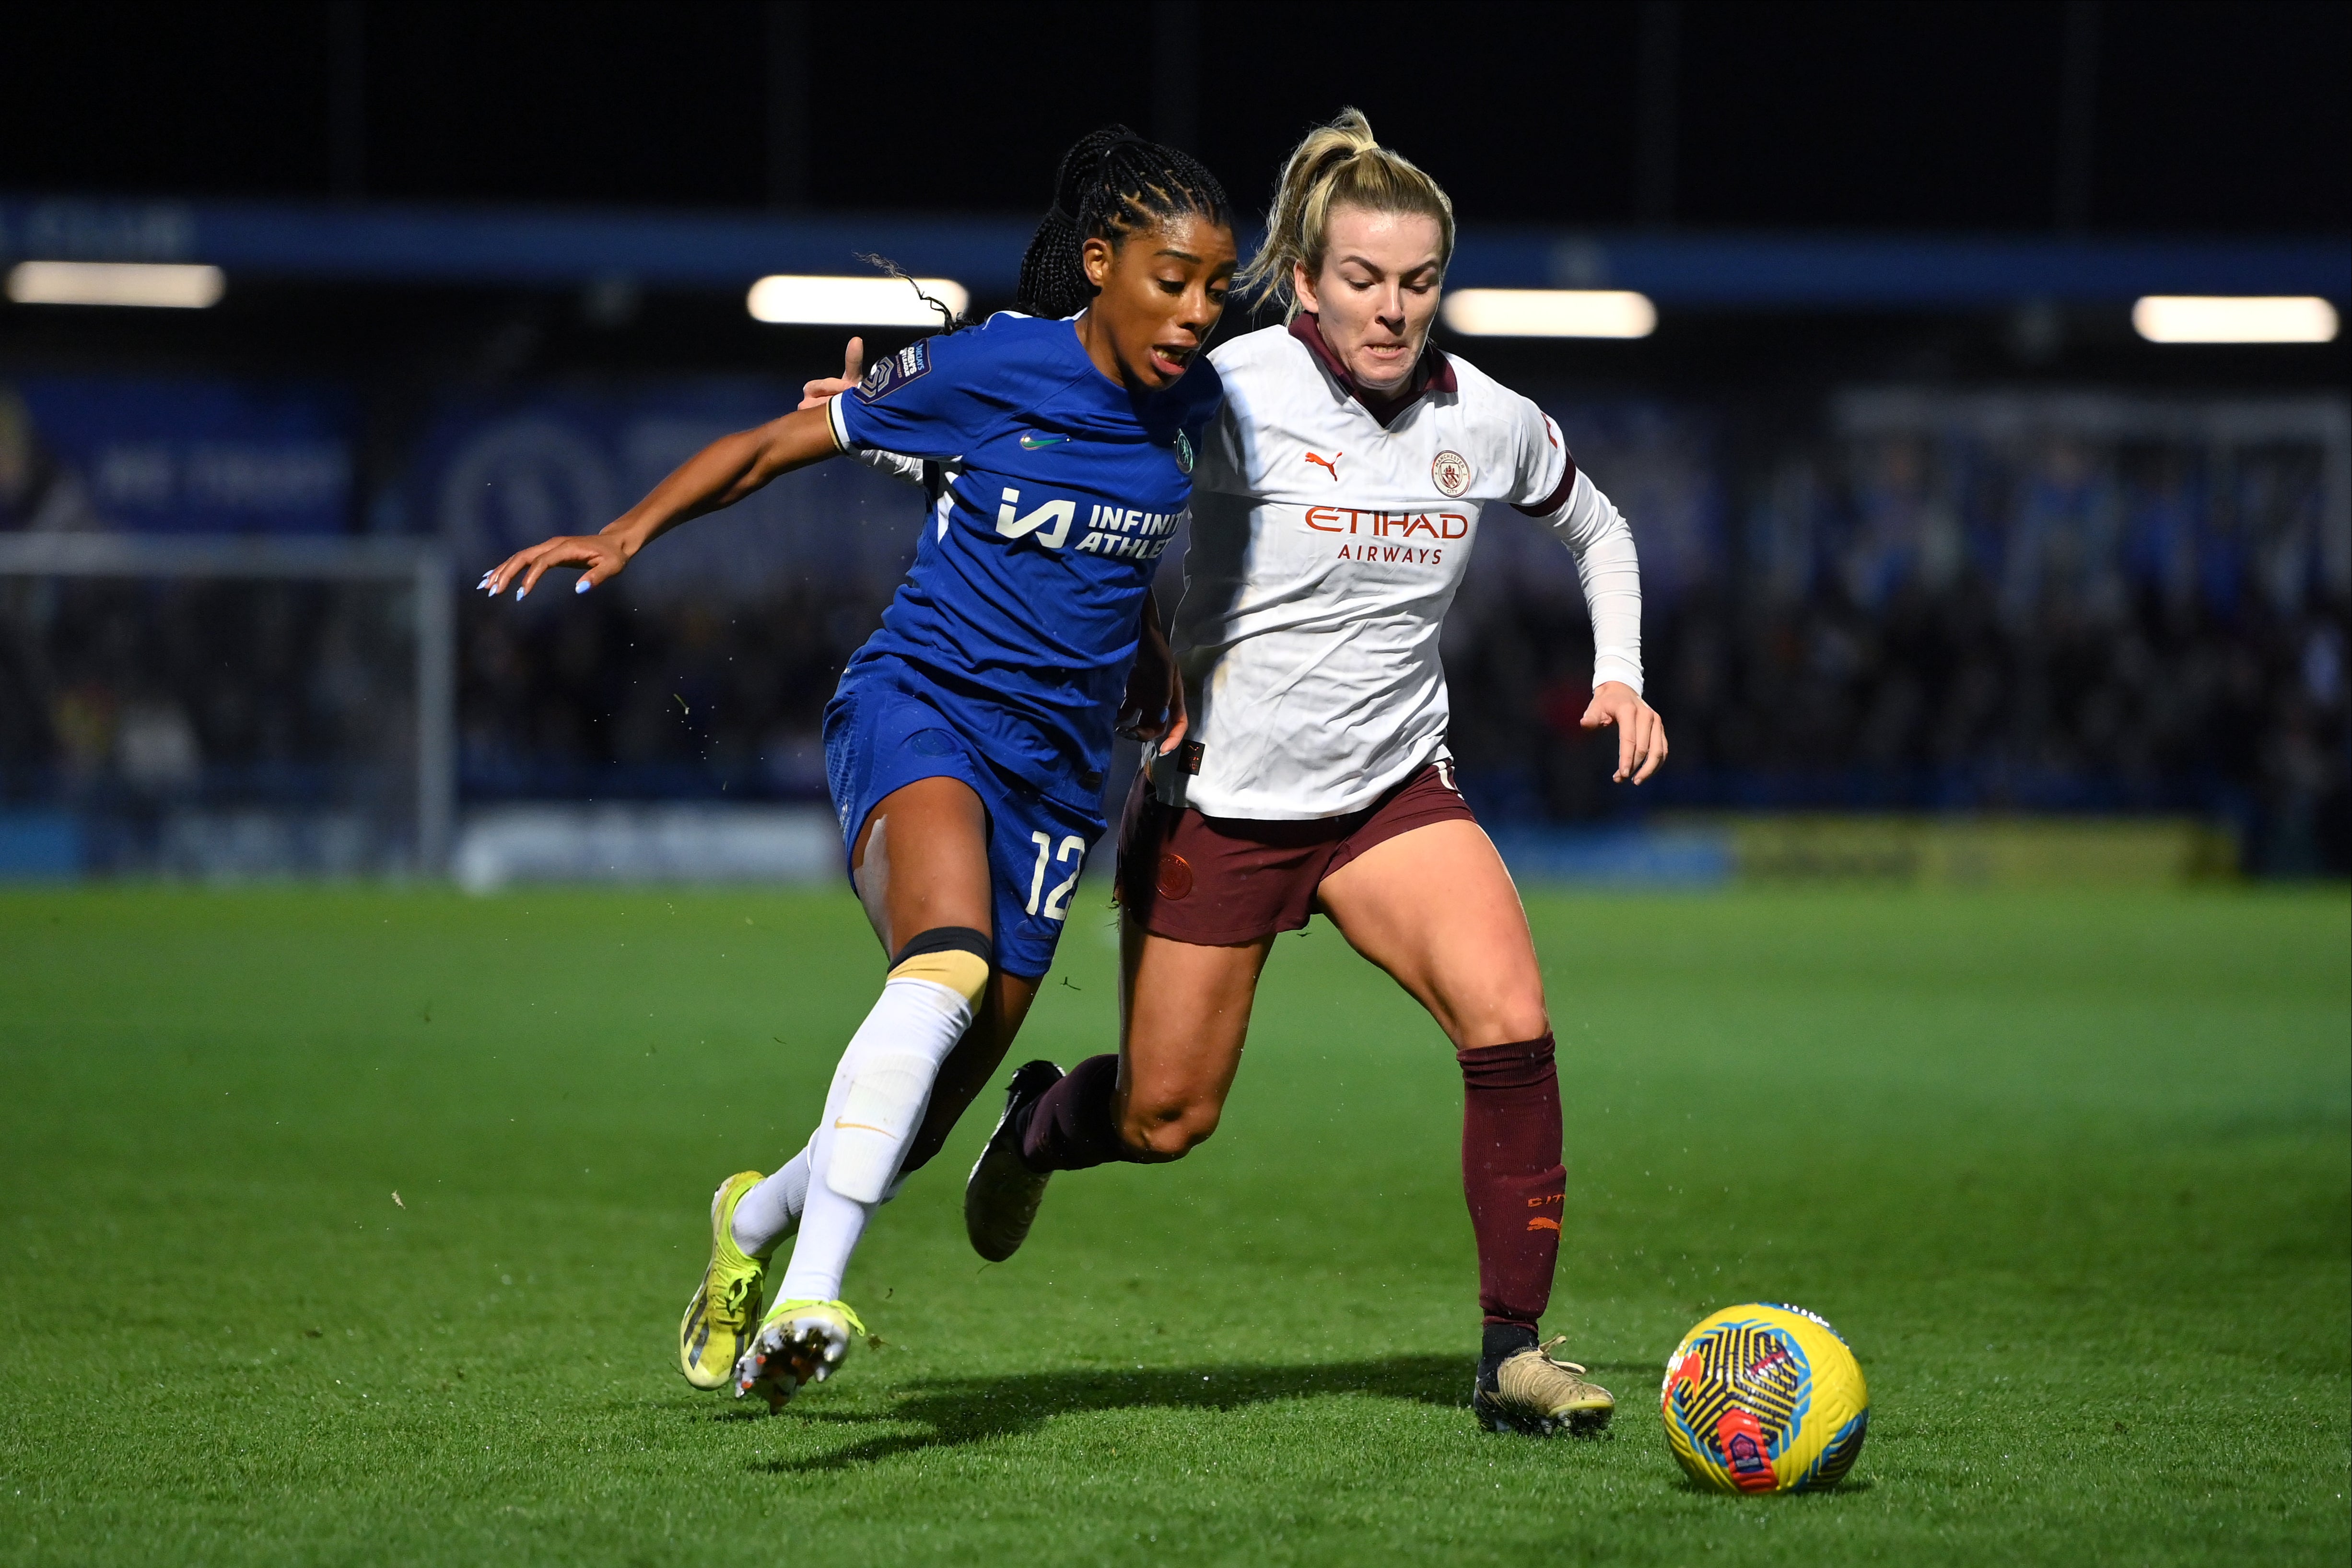 Chelsea and Manchester City are vying for the WSL title